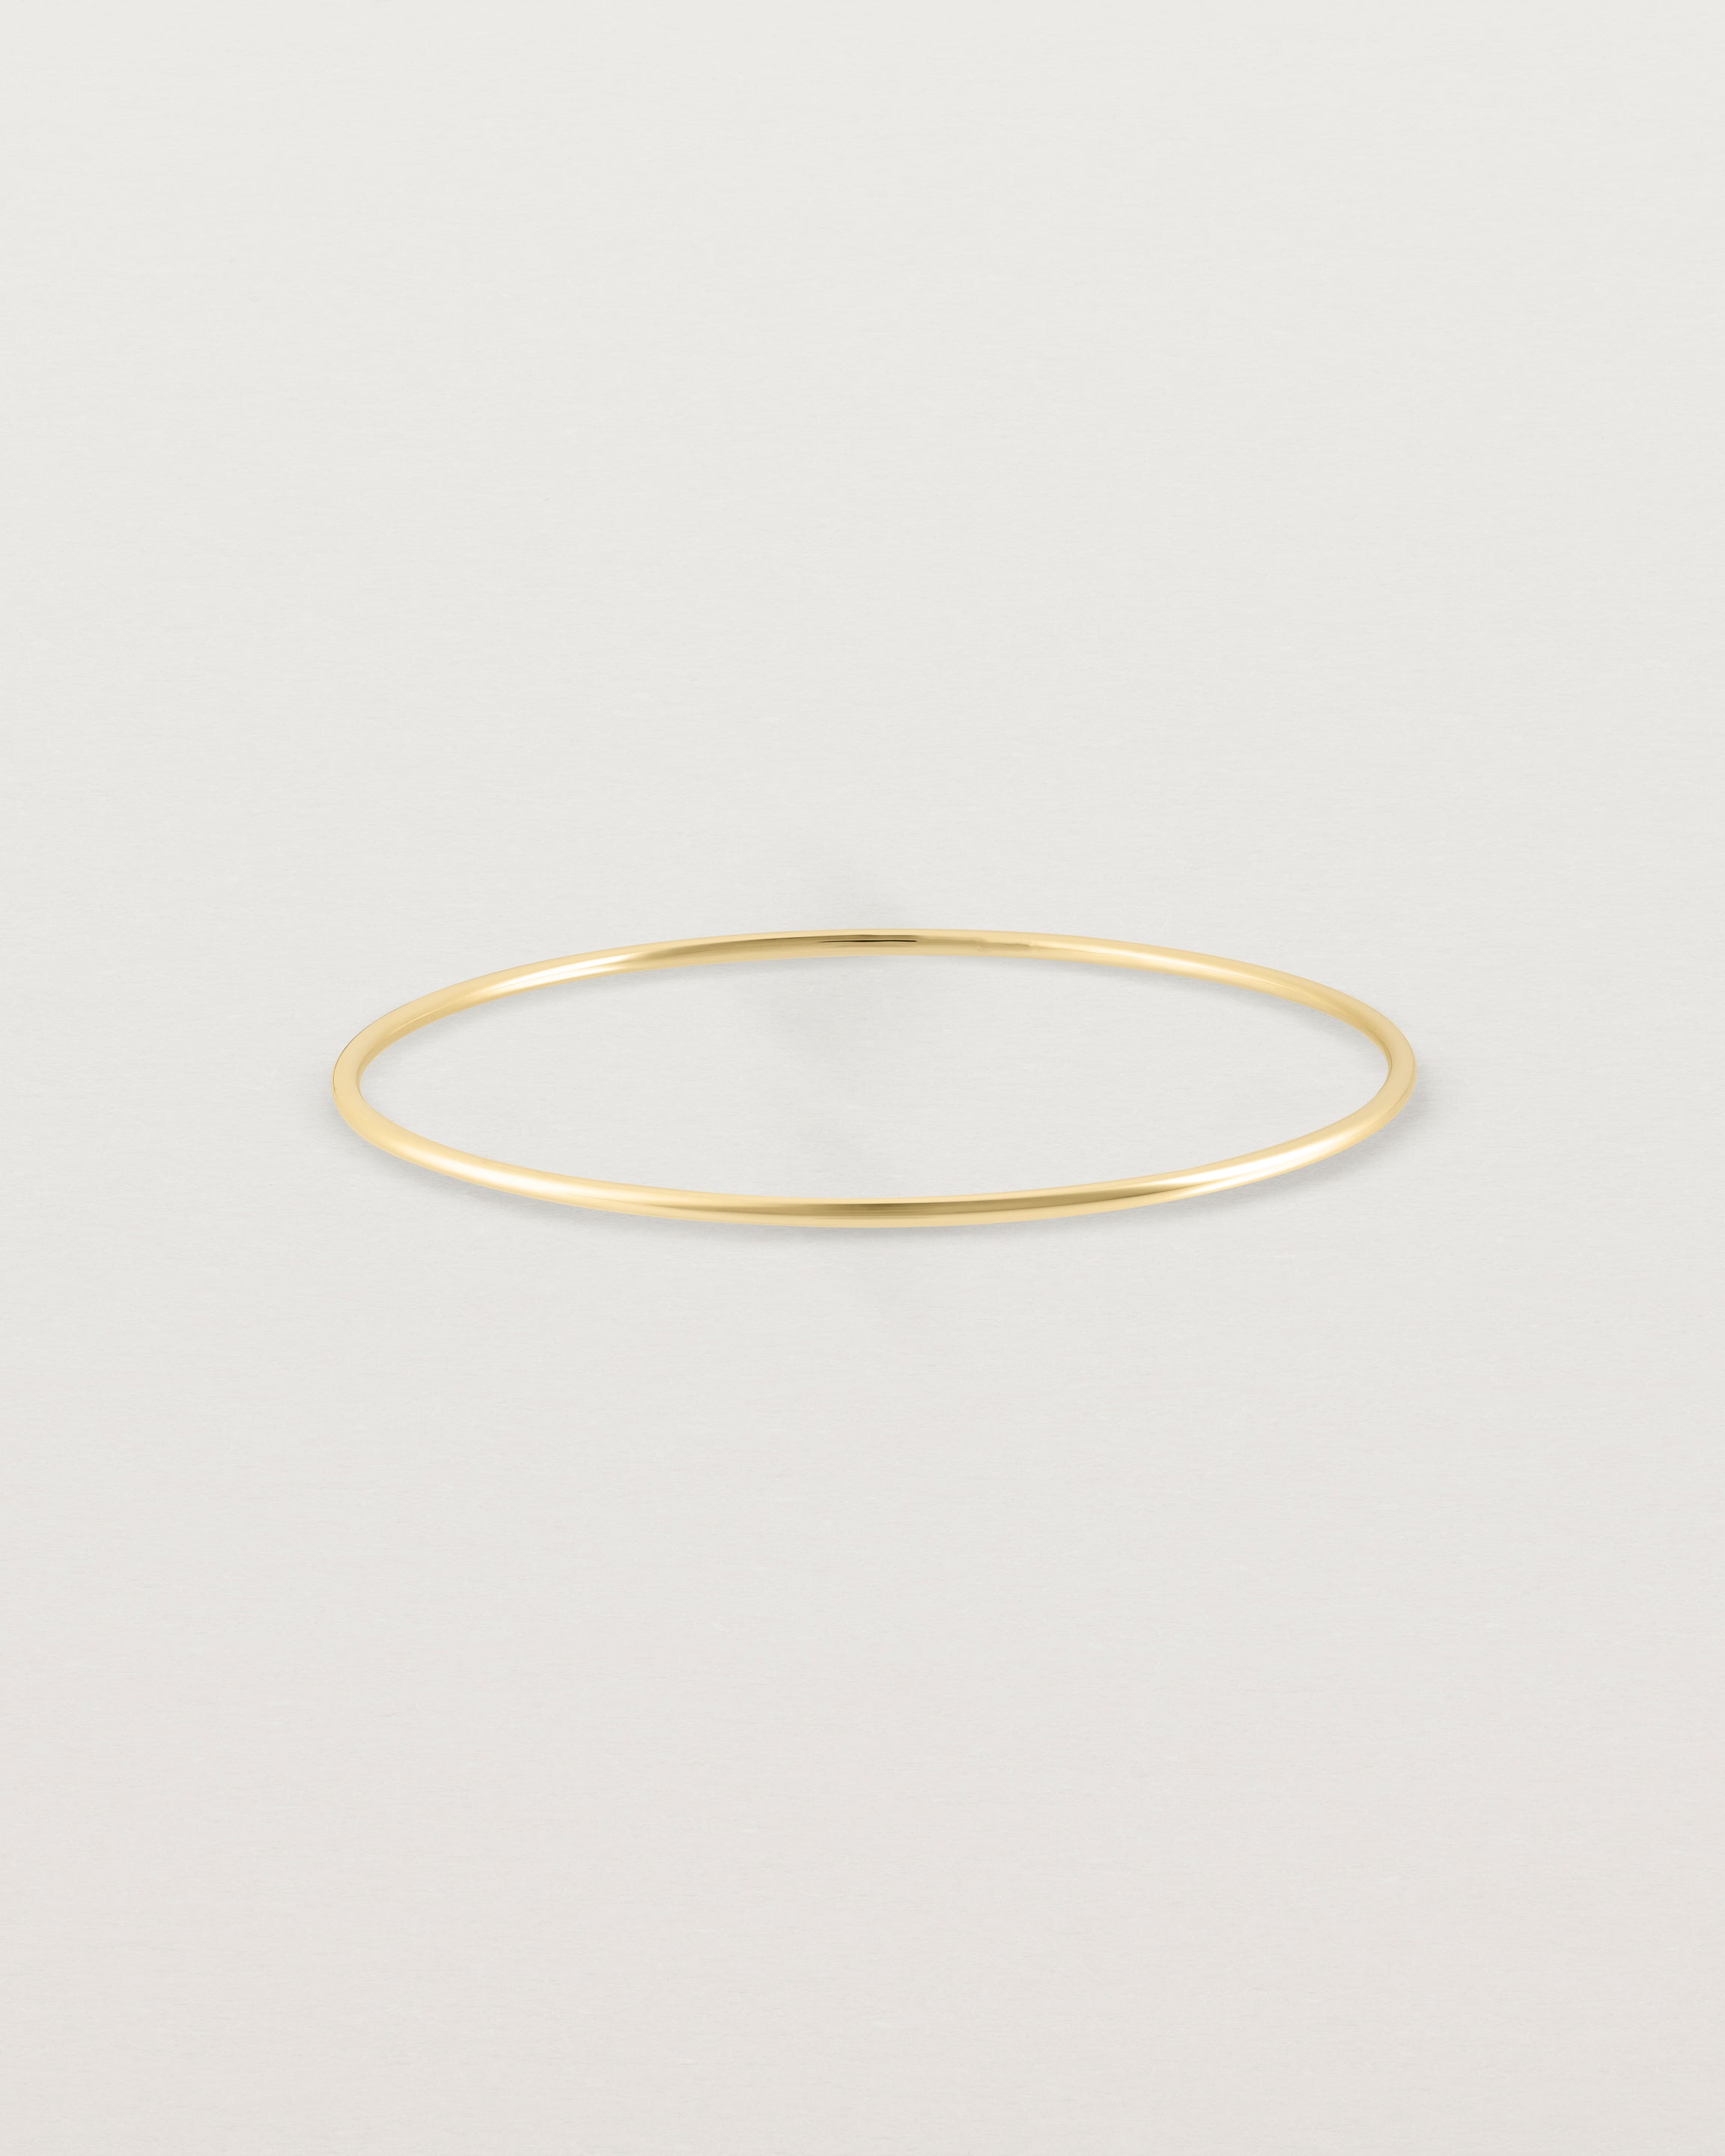 Front view of the Oval Bangle in Yellow Gold.